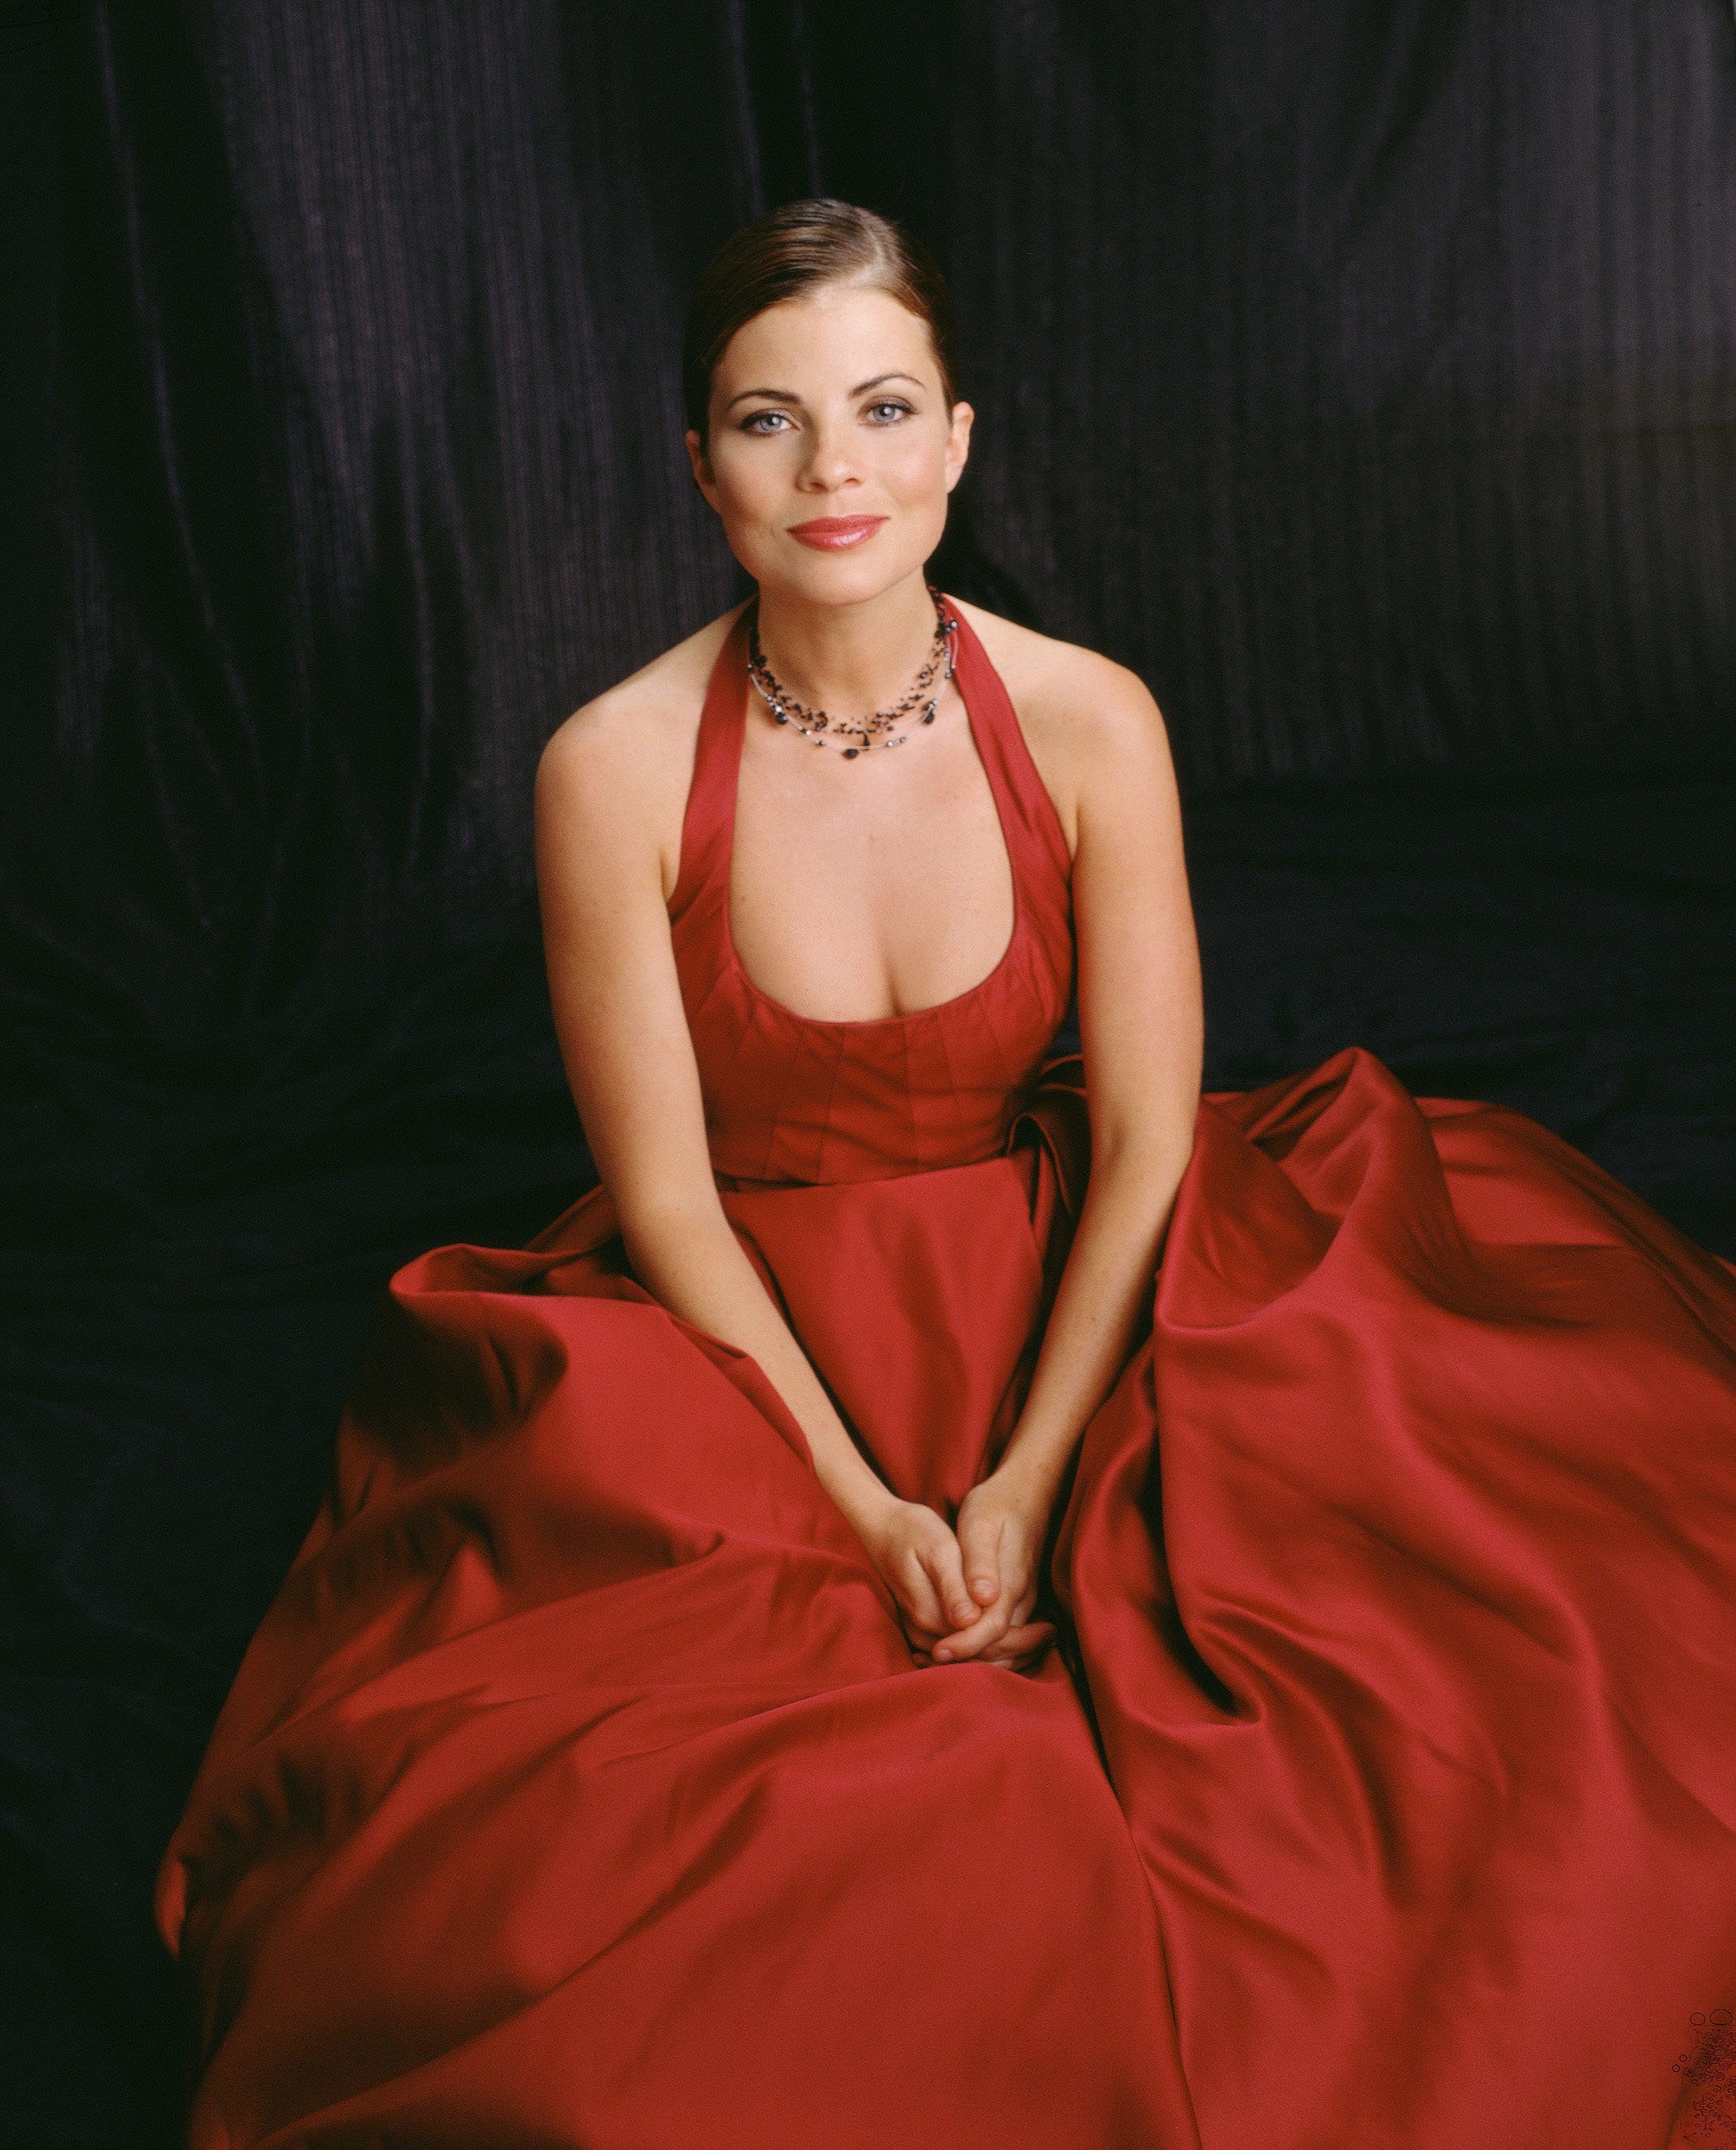 Portrait of Yasmine Bleeth for "Nash Bridges" on January 1, 1999, in Los Angeles | Source: Getty Images